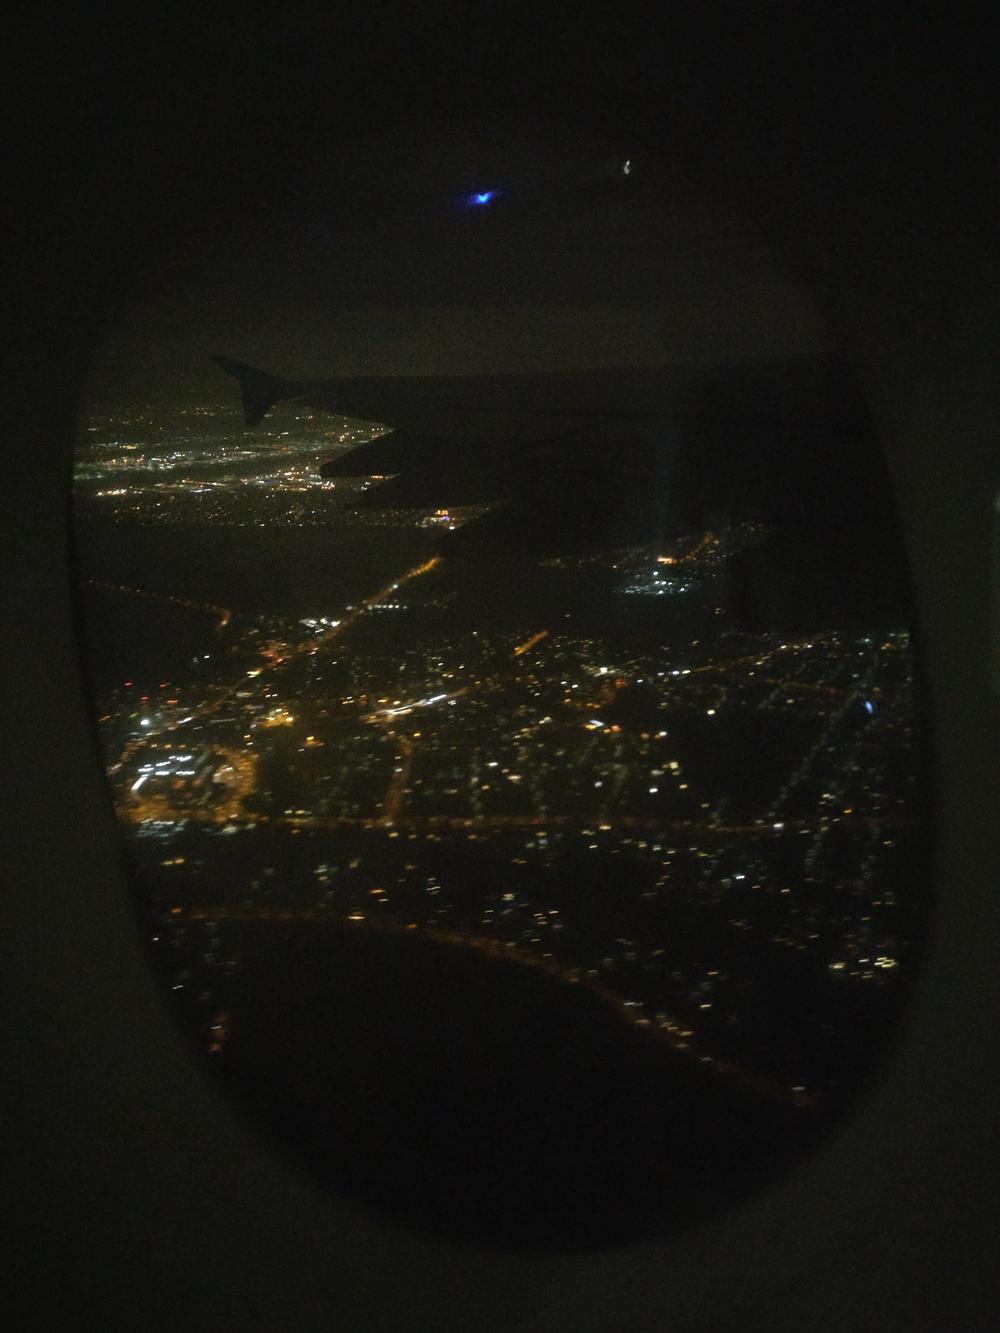 Flying over London at night